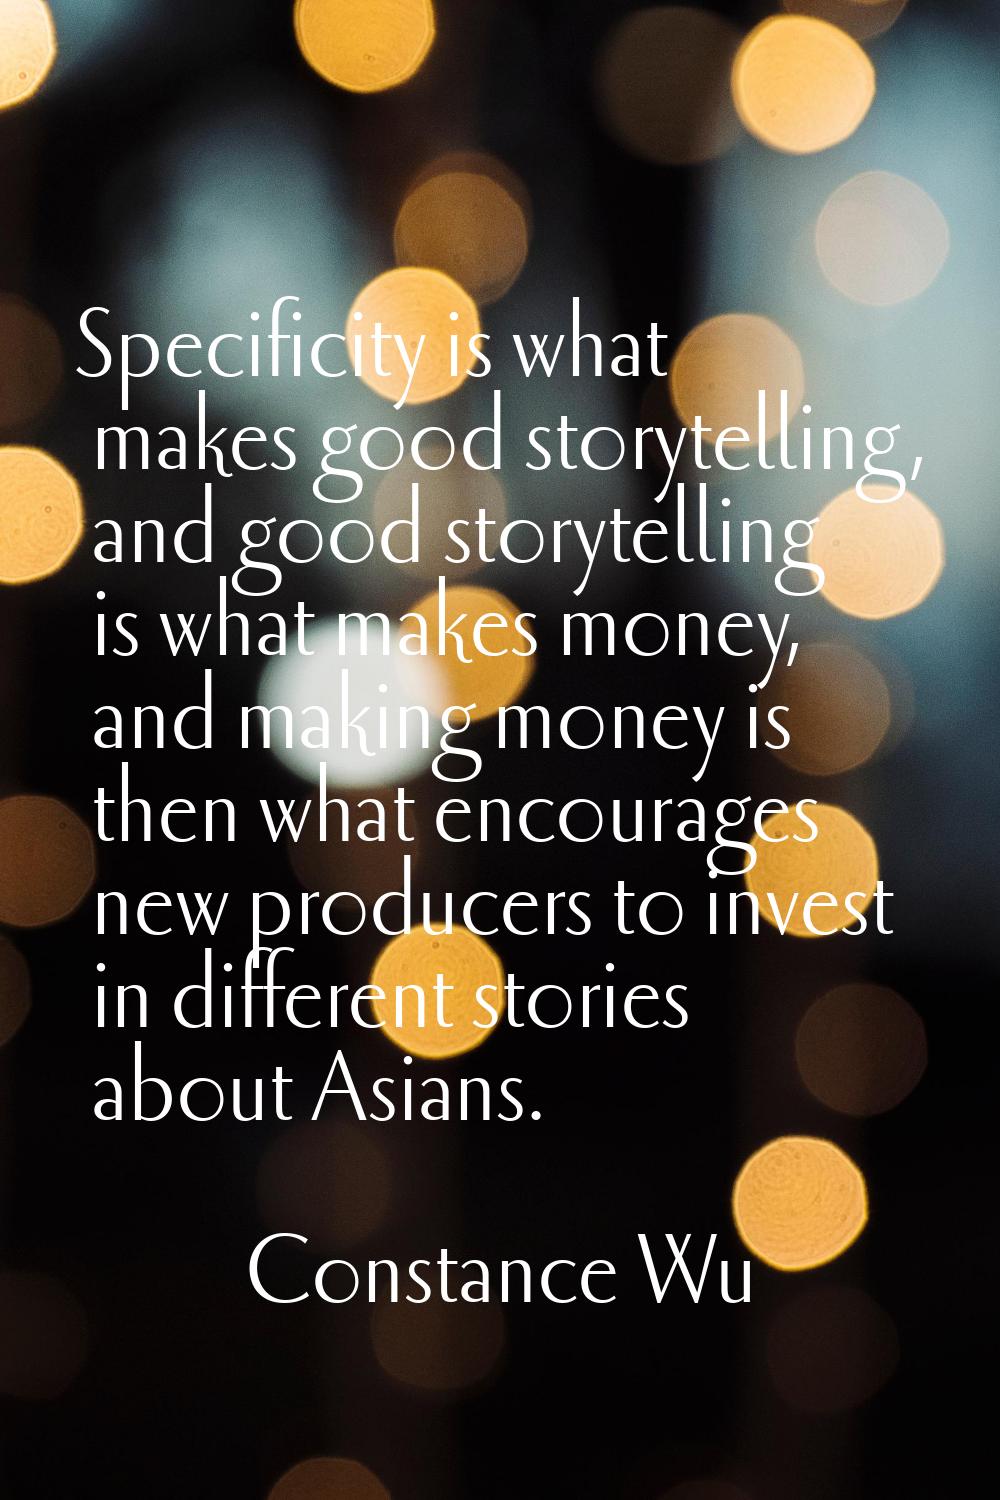 Specificity is what makes good storytelling, and good storytelling is what makes money, and making 